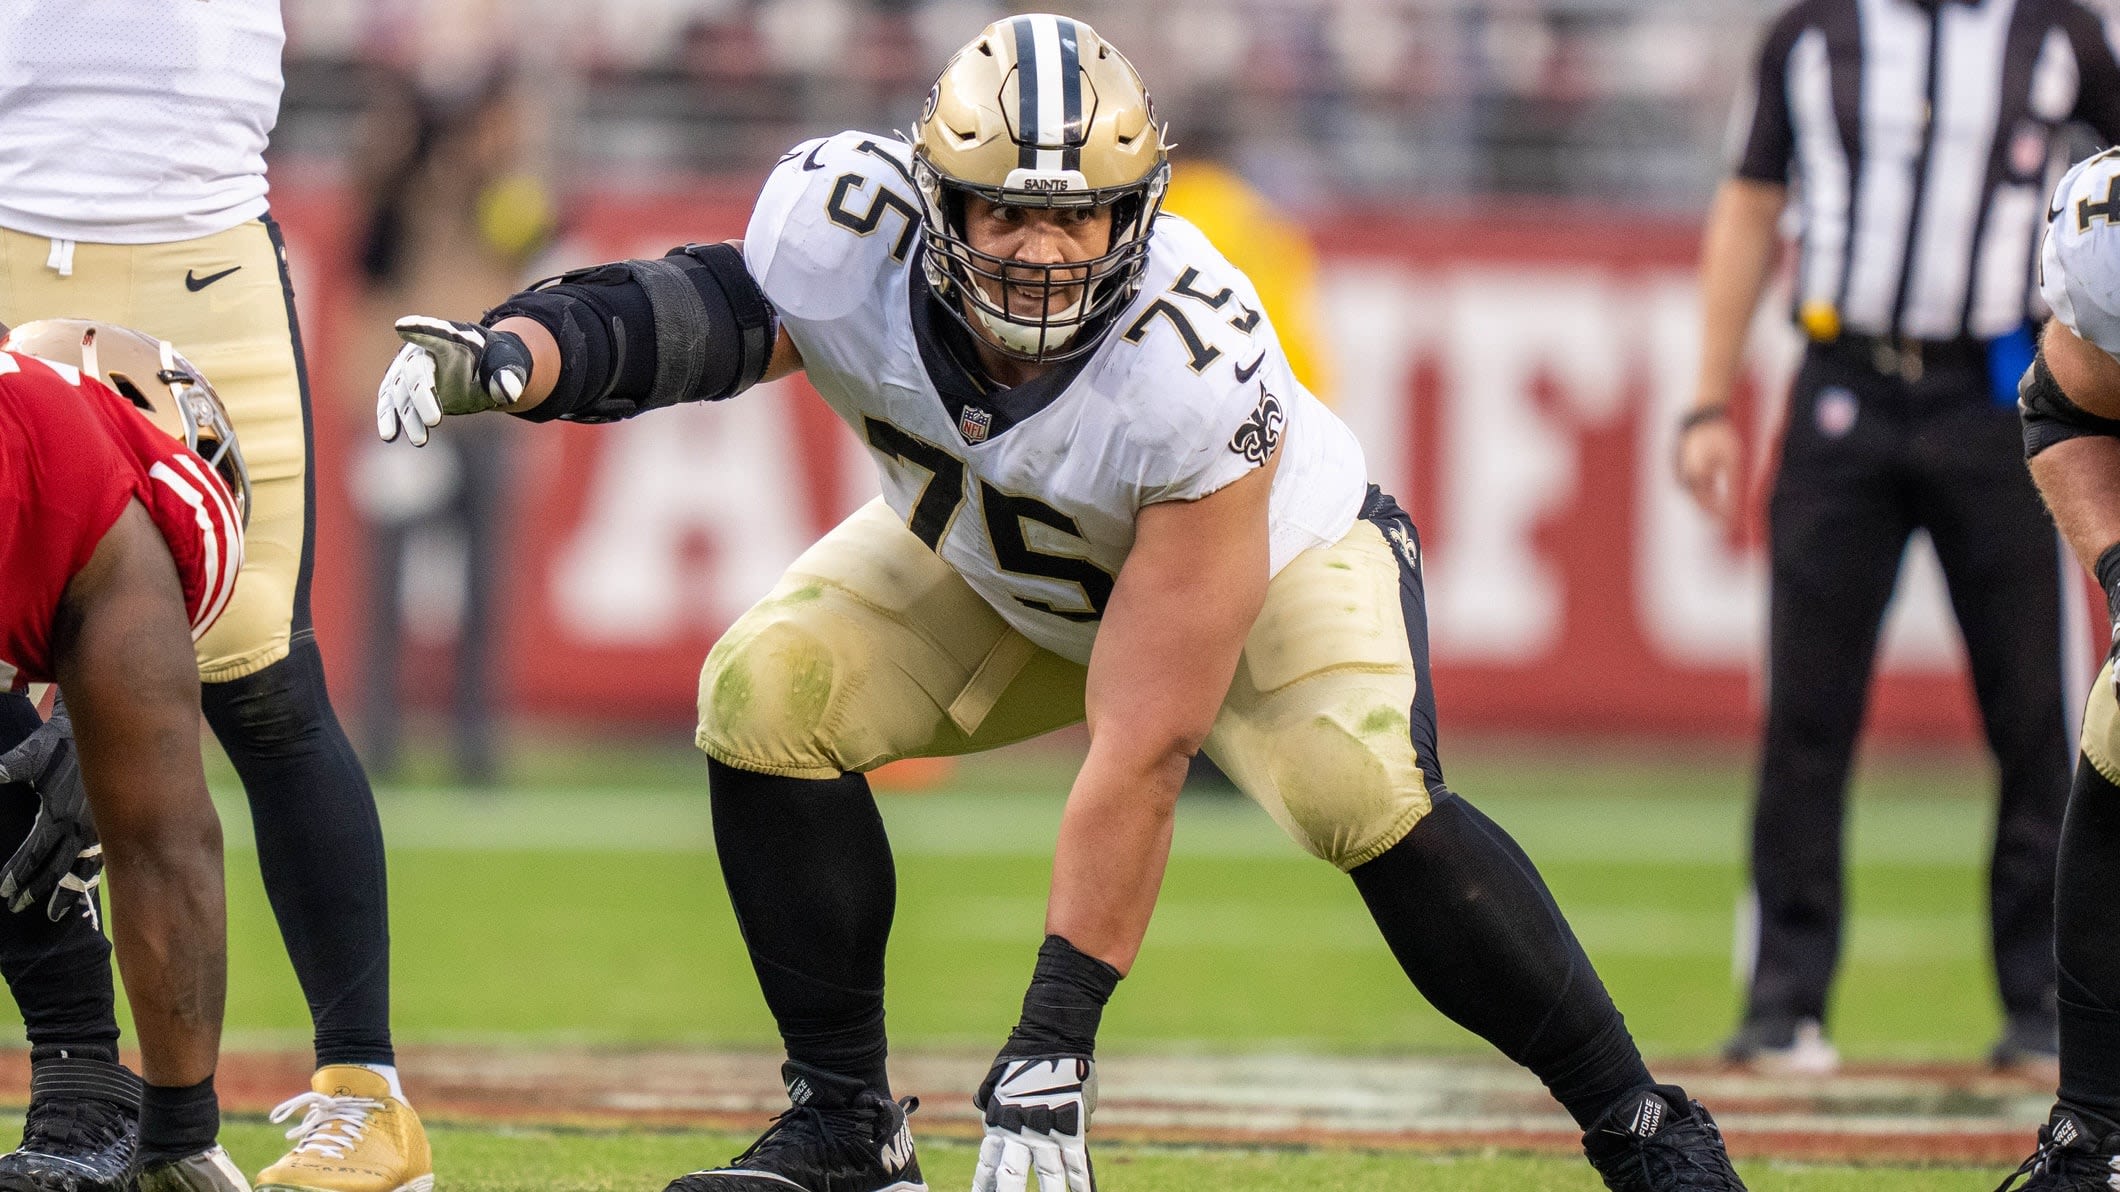 BREAKING: Former New Orleans Saints Offensive Lineman Andrus Peat Expected To Sign With The Las Vegas Raiders